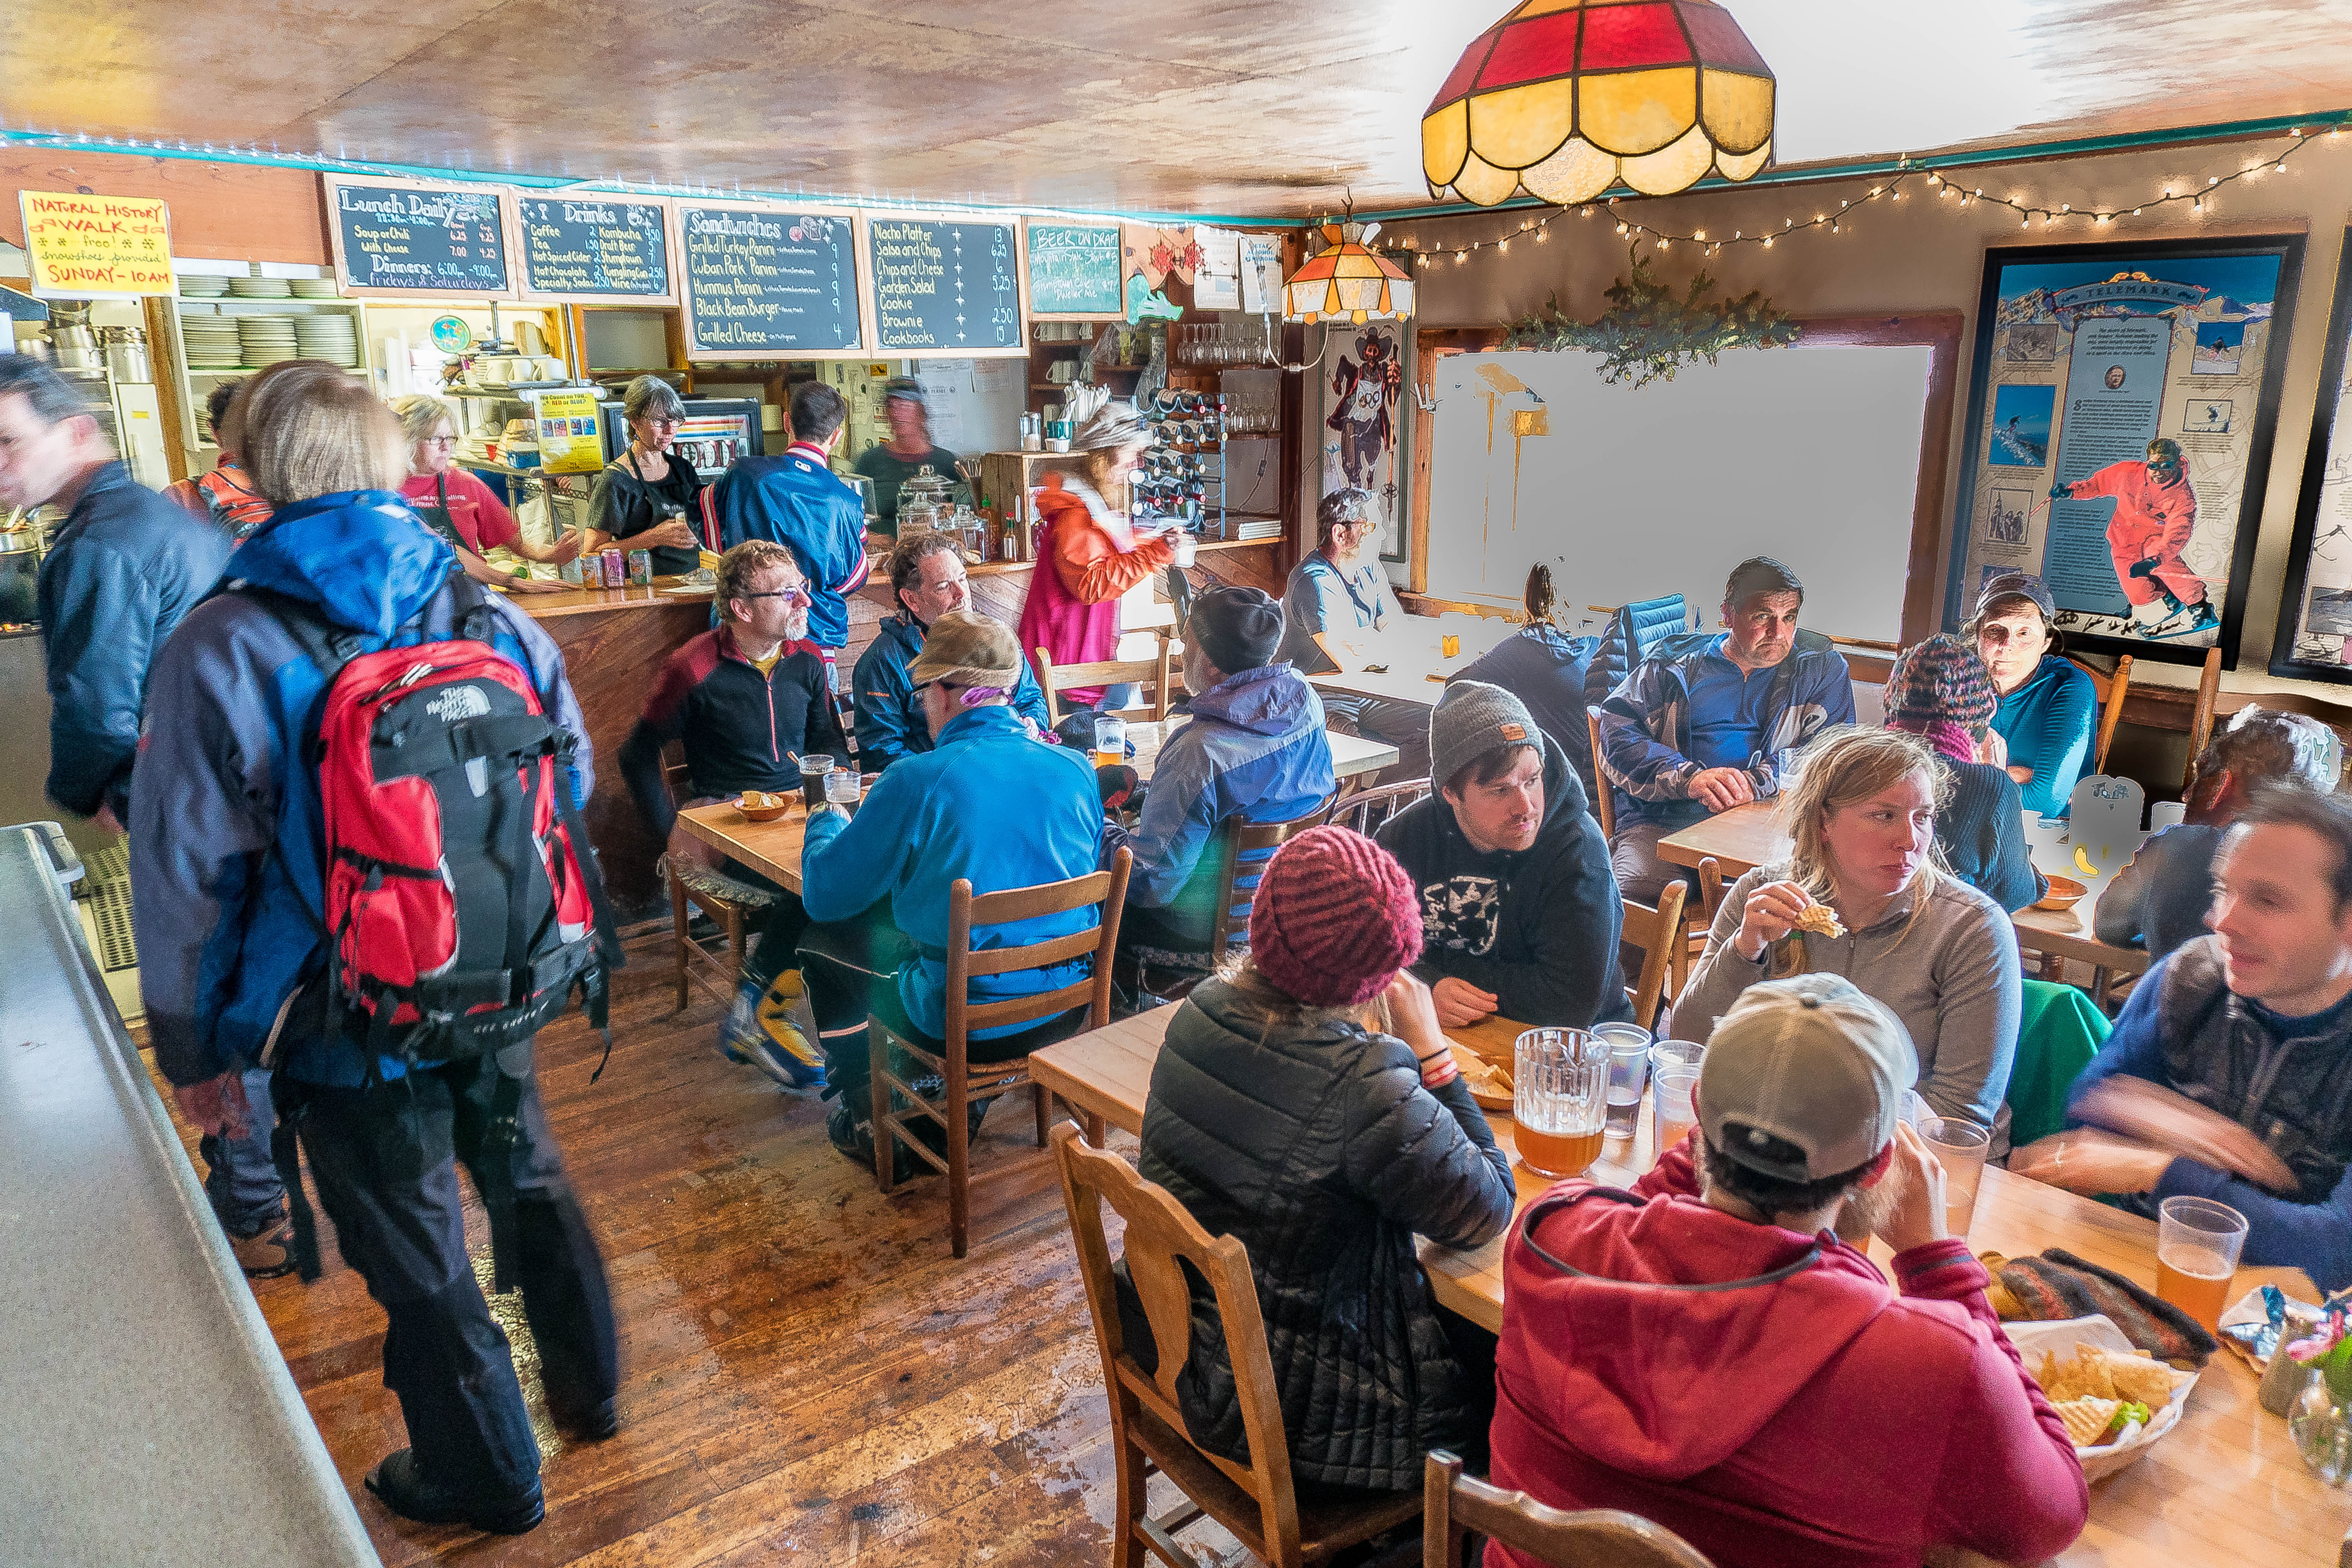 Whitegrass Cafe serves up the finest, most healthy food in Canaan Valley.